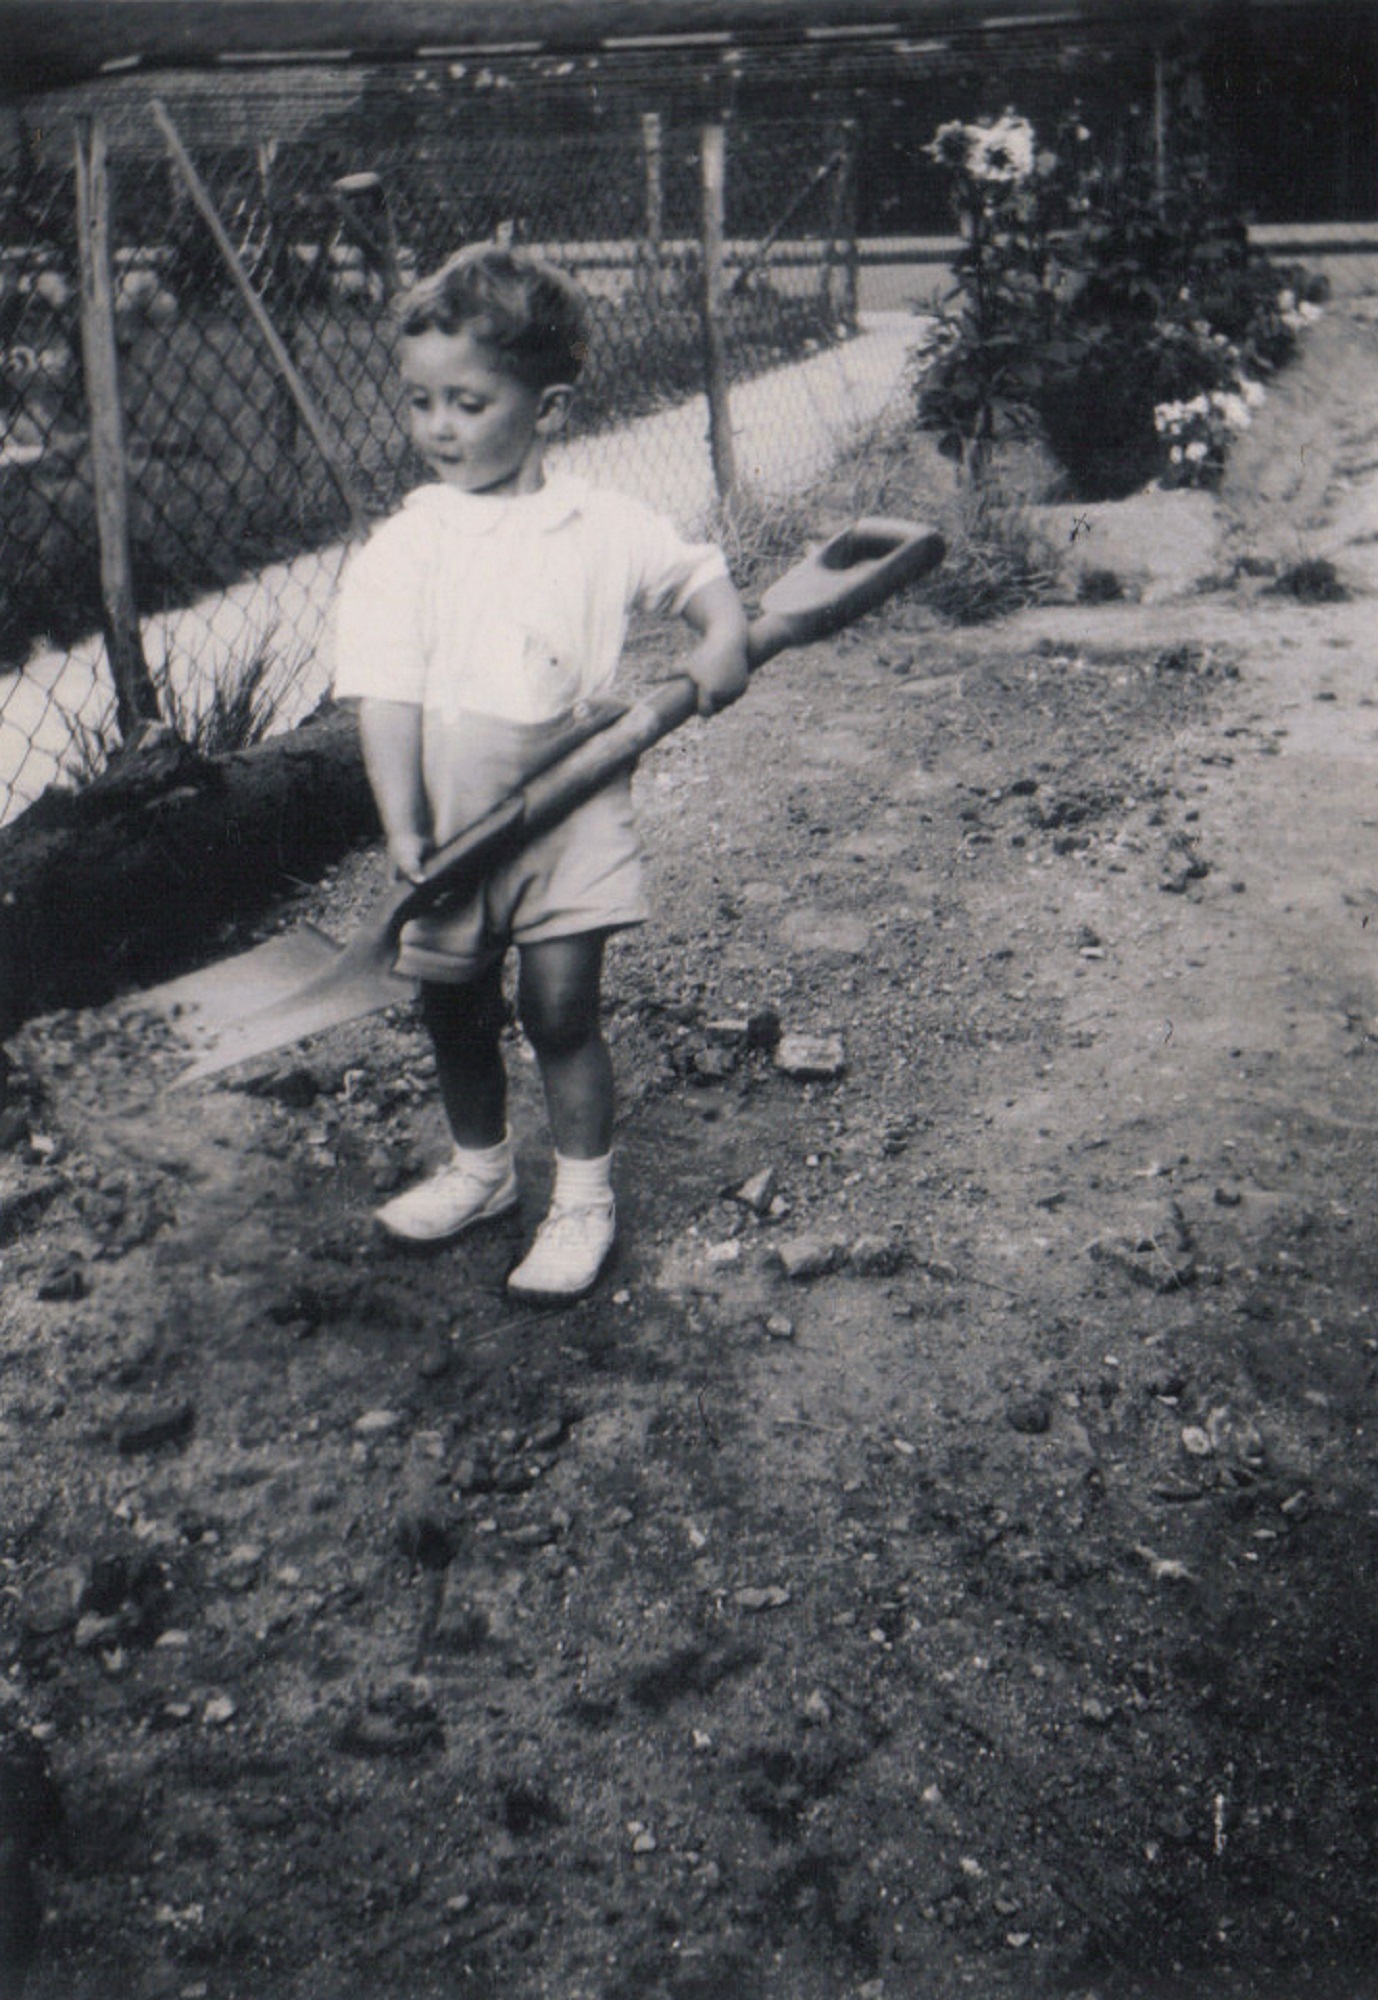 Terence with a large shovel in the prefab garden, Dartmouth Park Hill, London N19